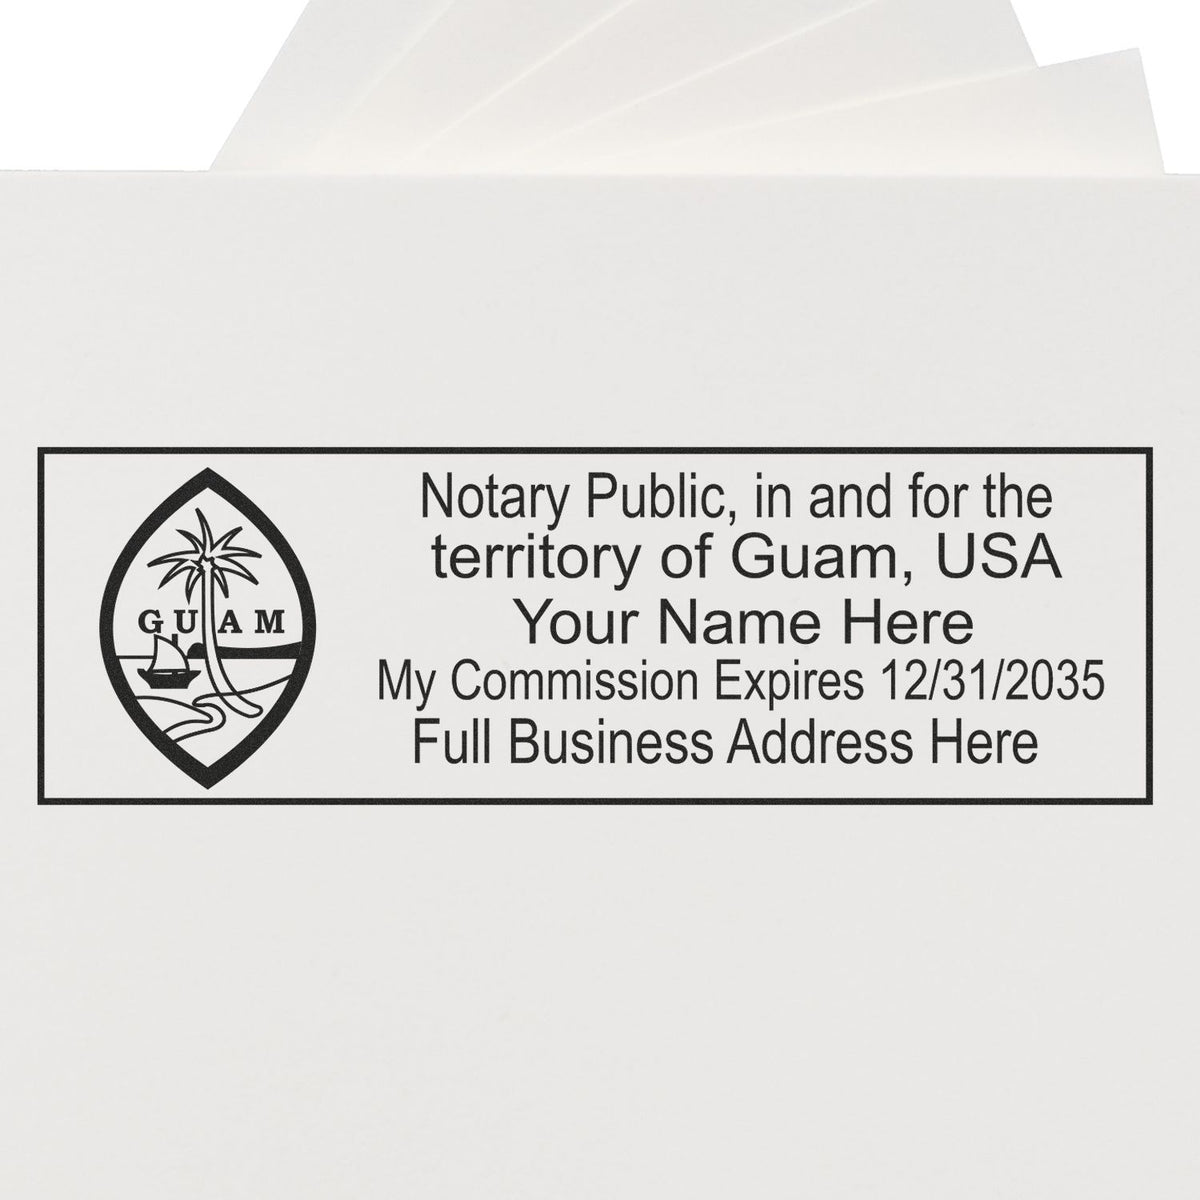 A lifestyle photo showing a stamped image of the Wooden Handle Guam Rectangular Notary Public Stamp on a piece of paper